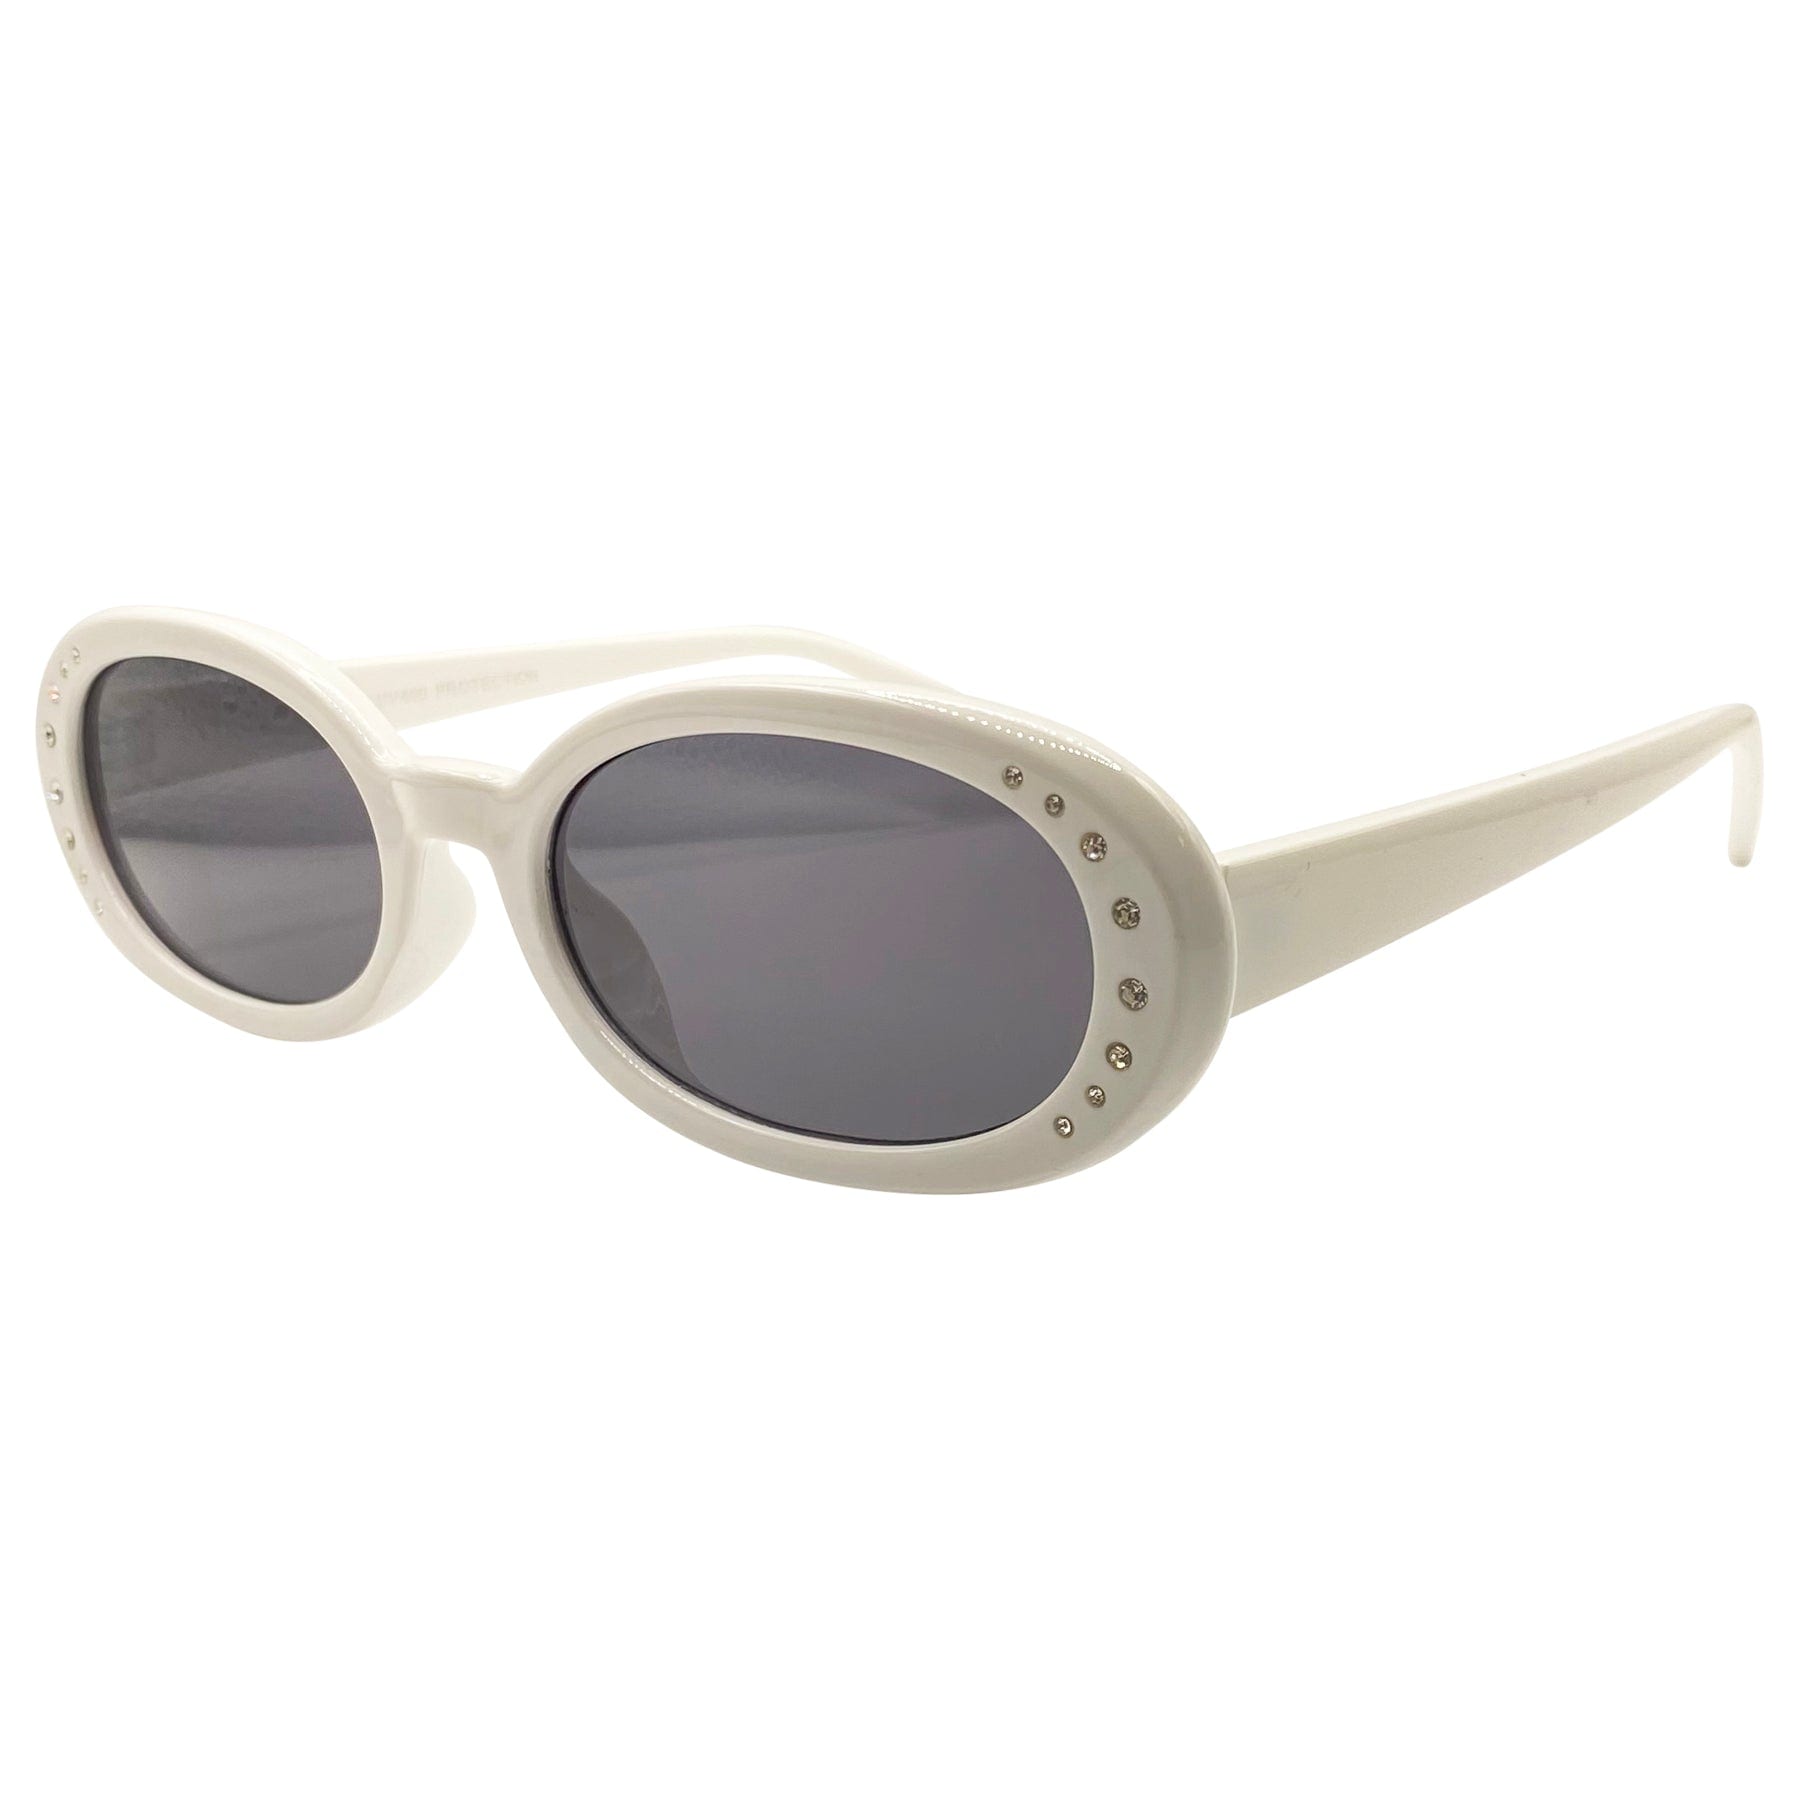 rounded oval shape white sunglasses women with a 90s style 